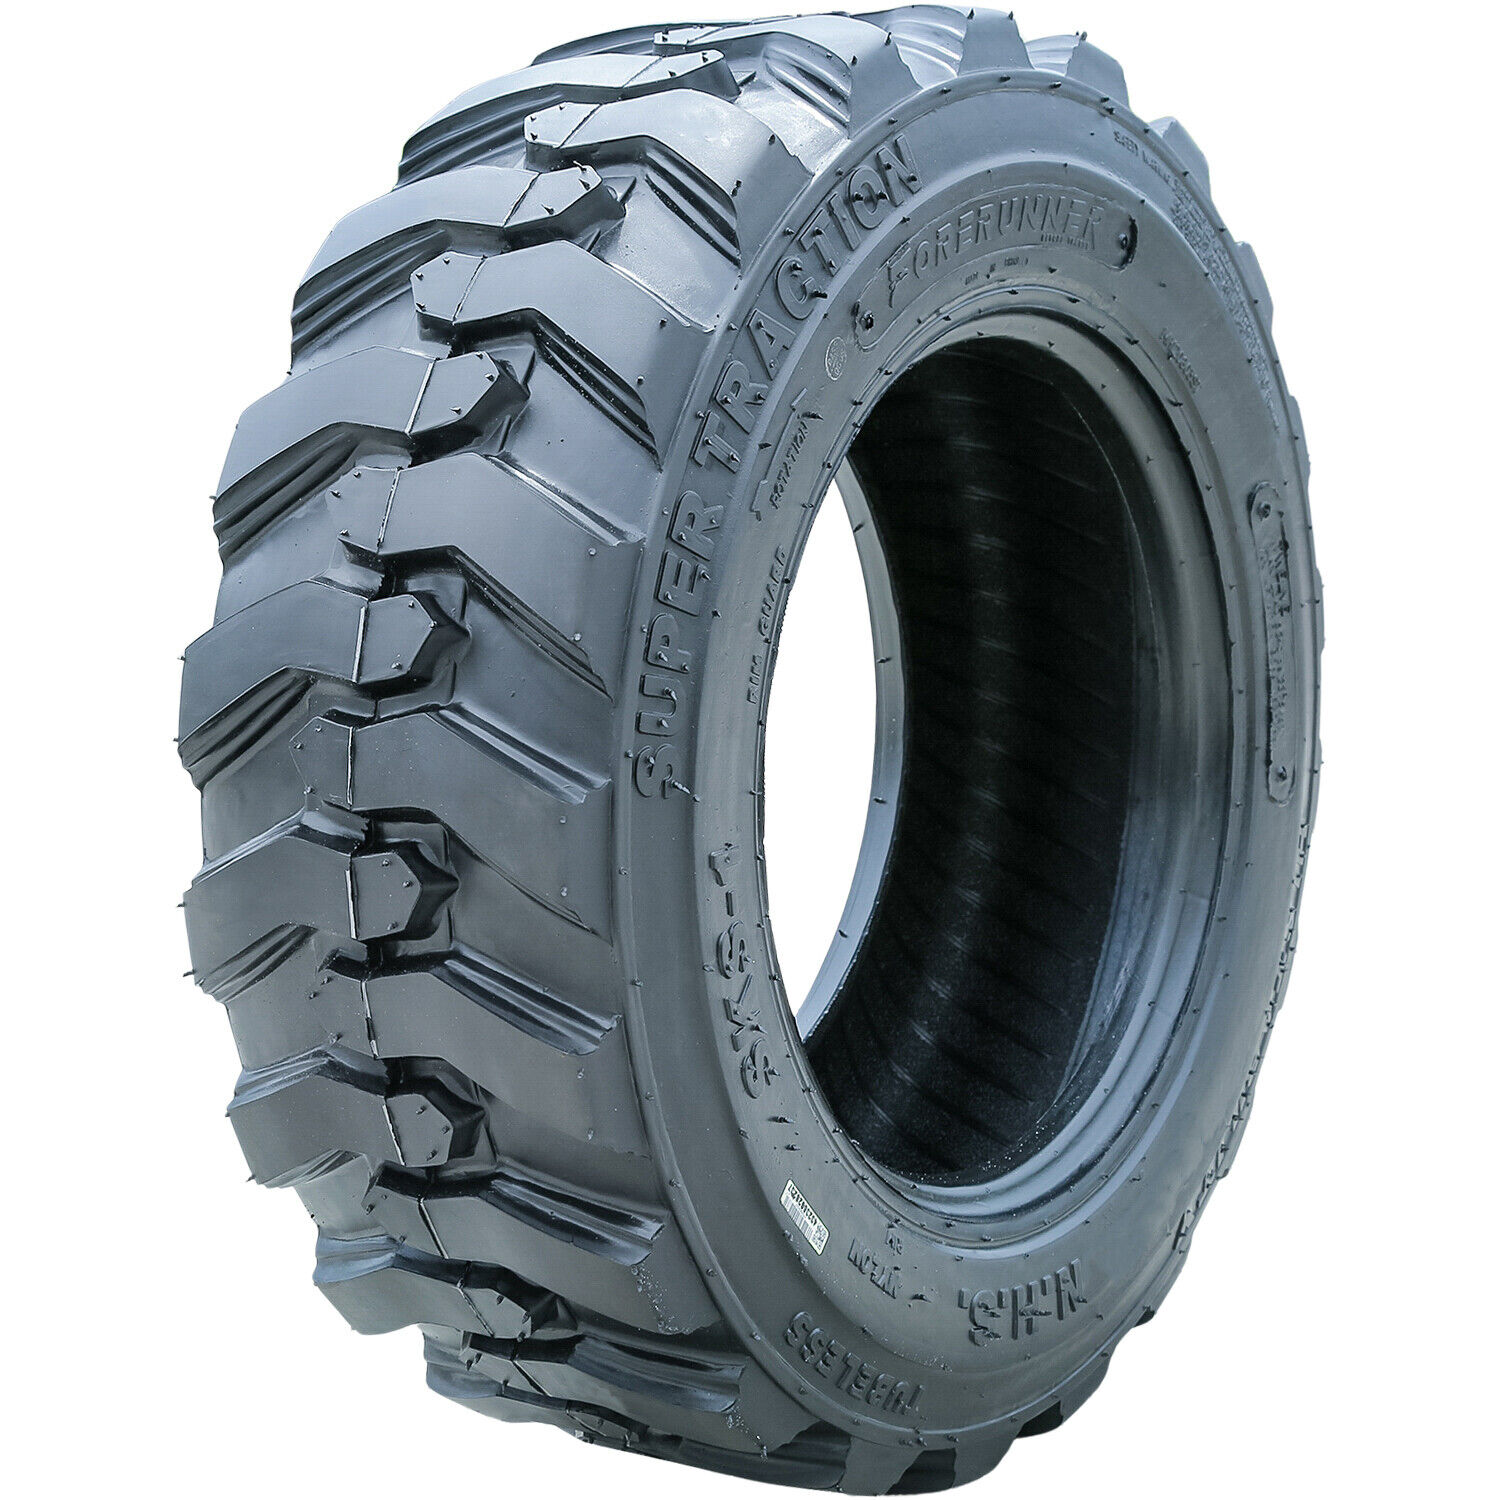 Tire Forerunner SKS-1 12-16.5 Load 14 Ply Industrial